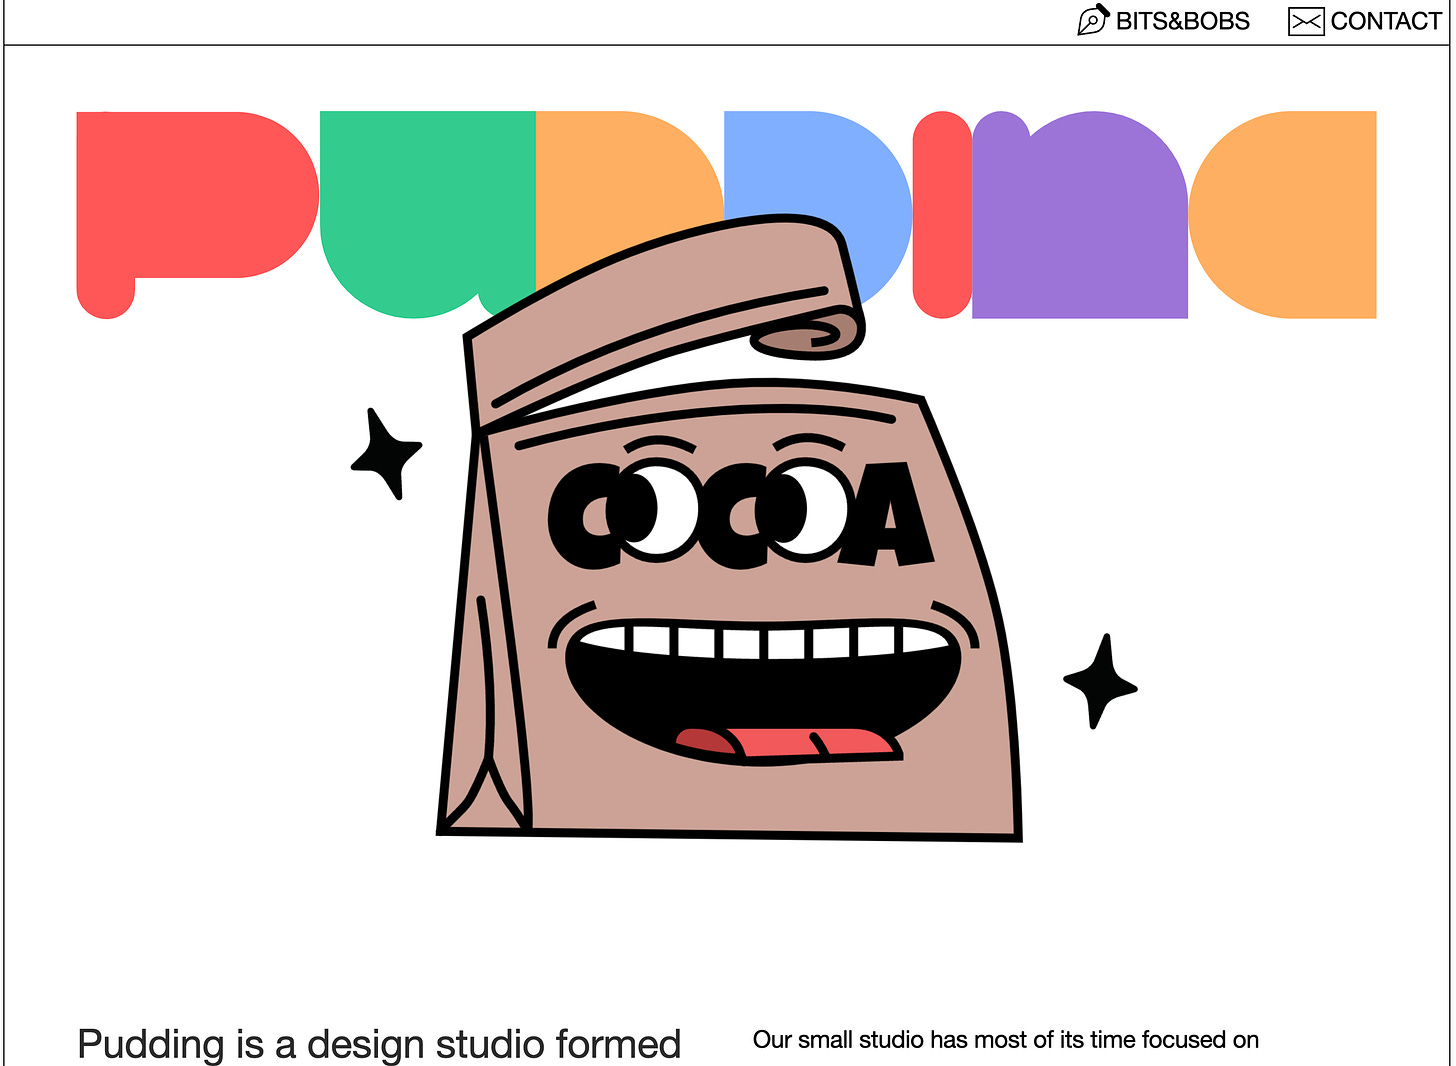 A screenshot from the Pudding Studio homepage.